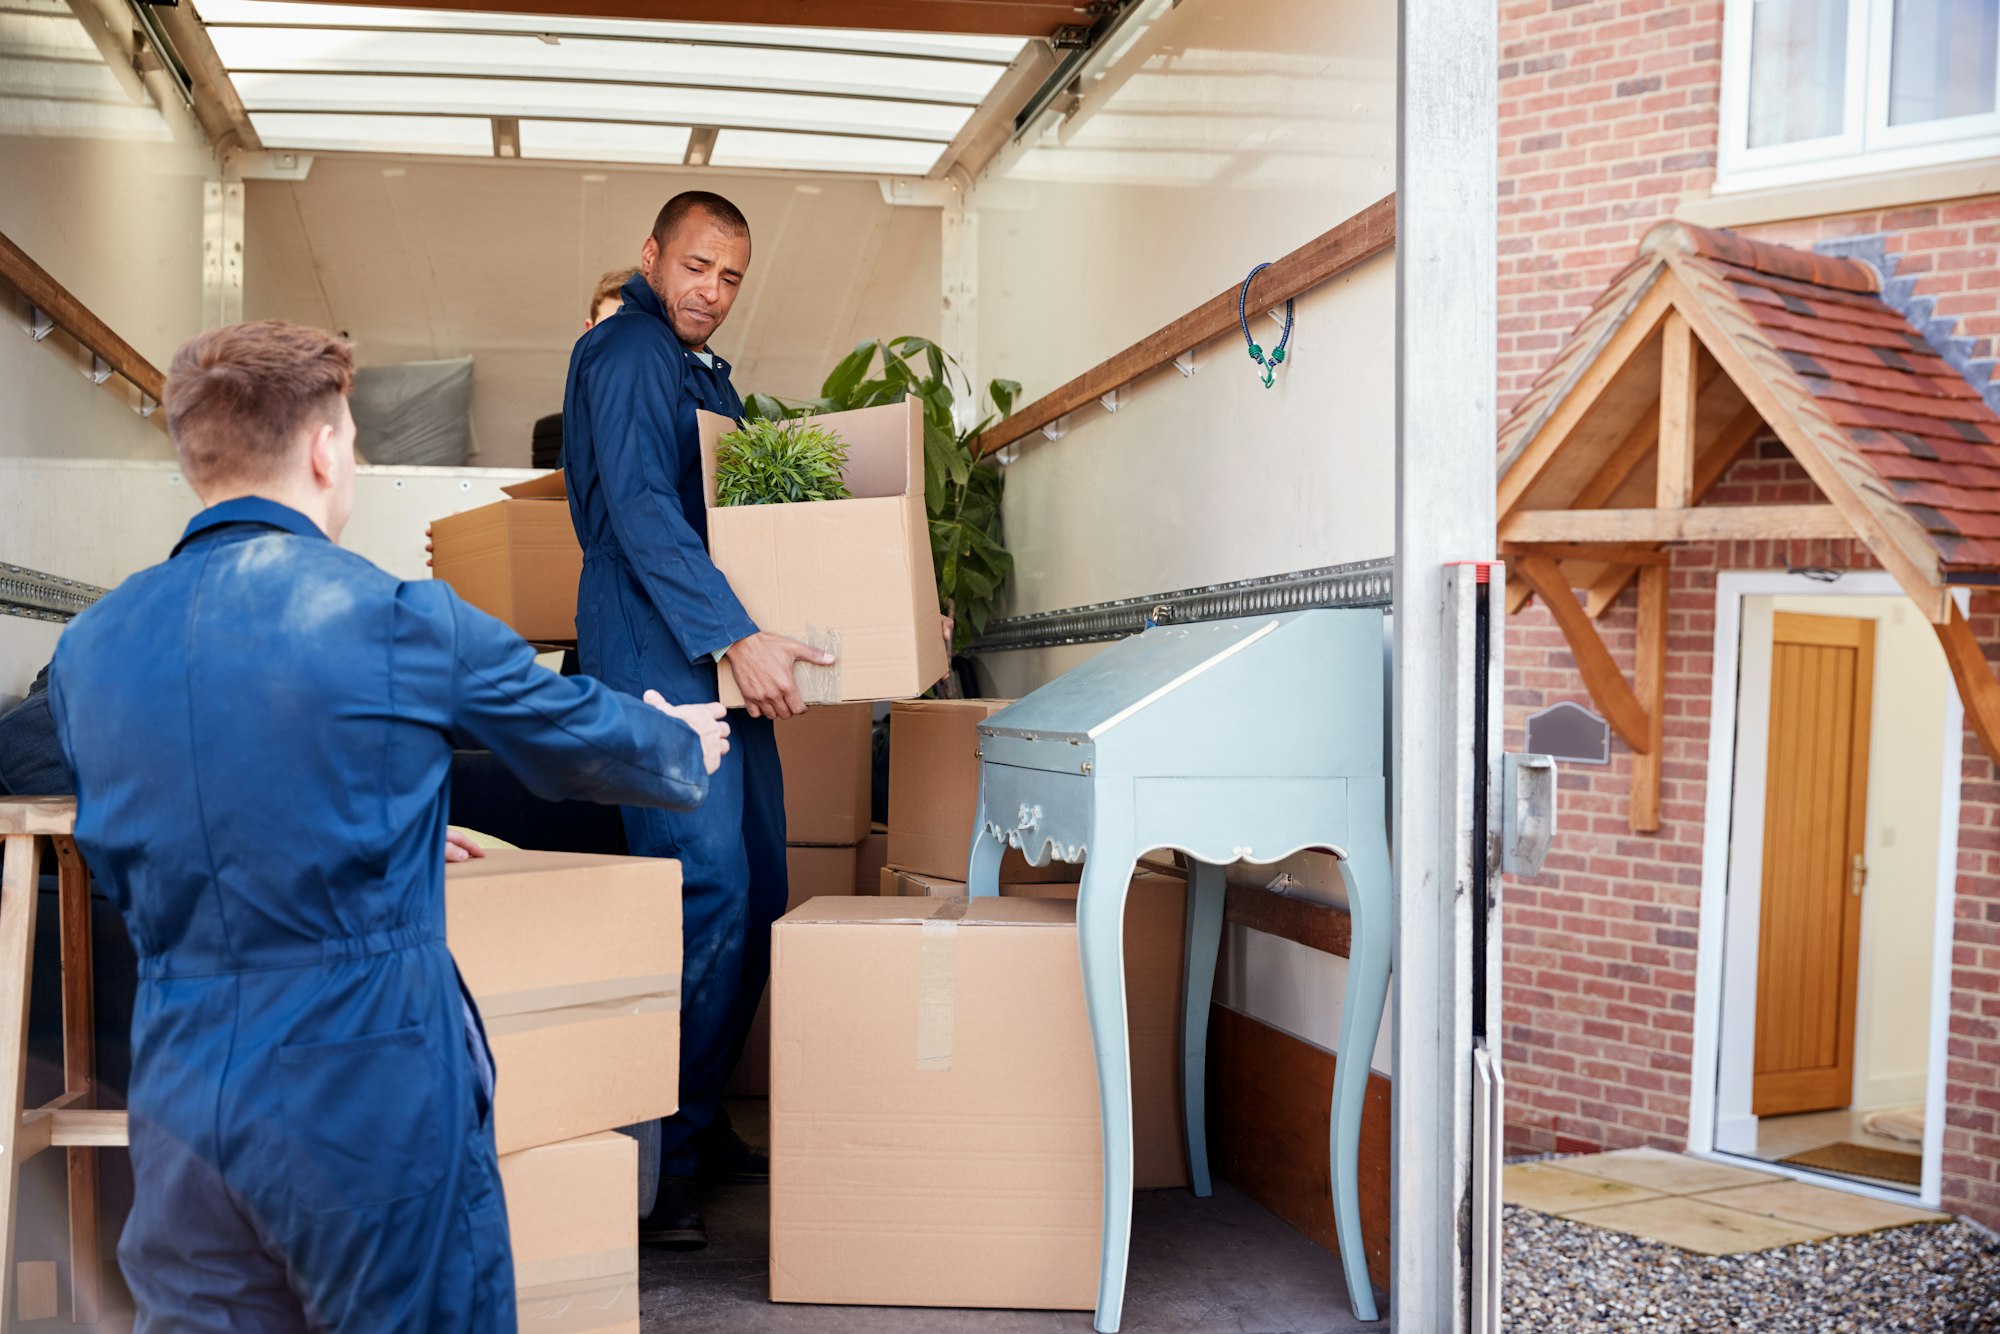 Moving company employee checks boxes in a small truck before sending them to the homeowner.